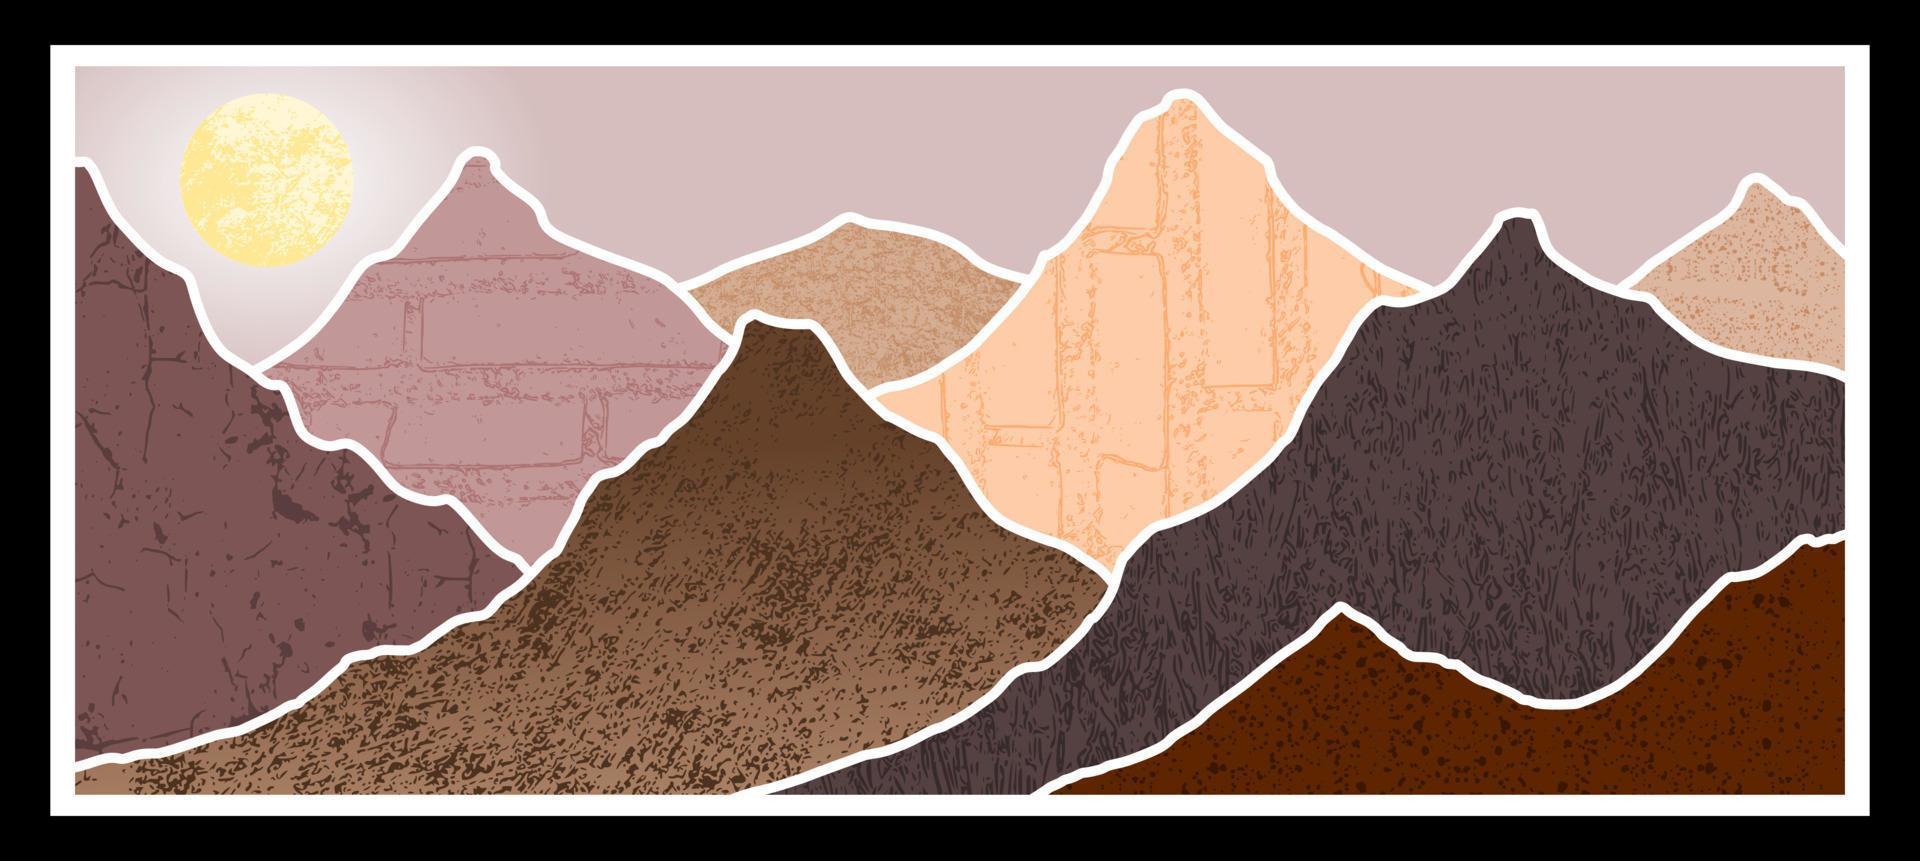 Set of abstract mountain painting. abstract art background. vector